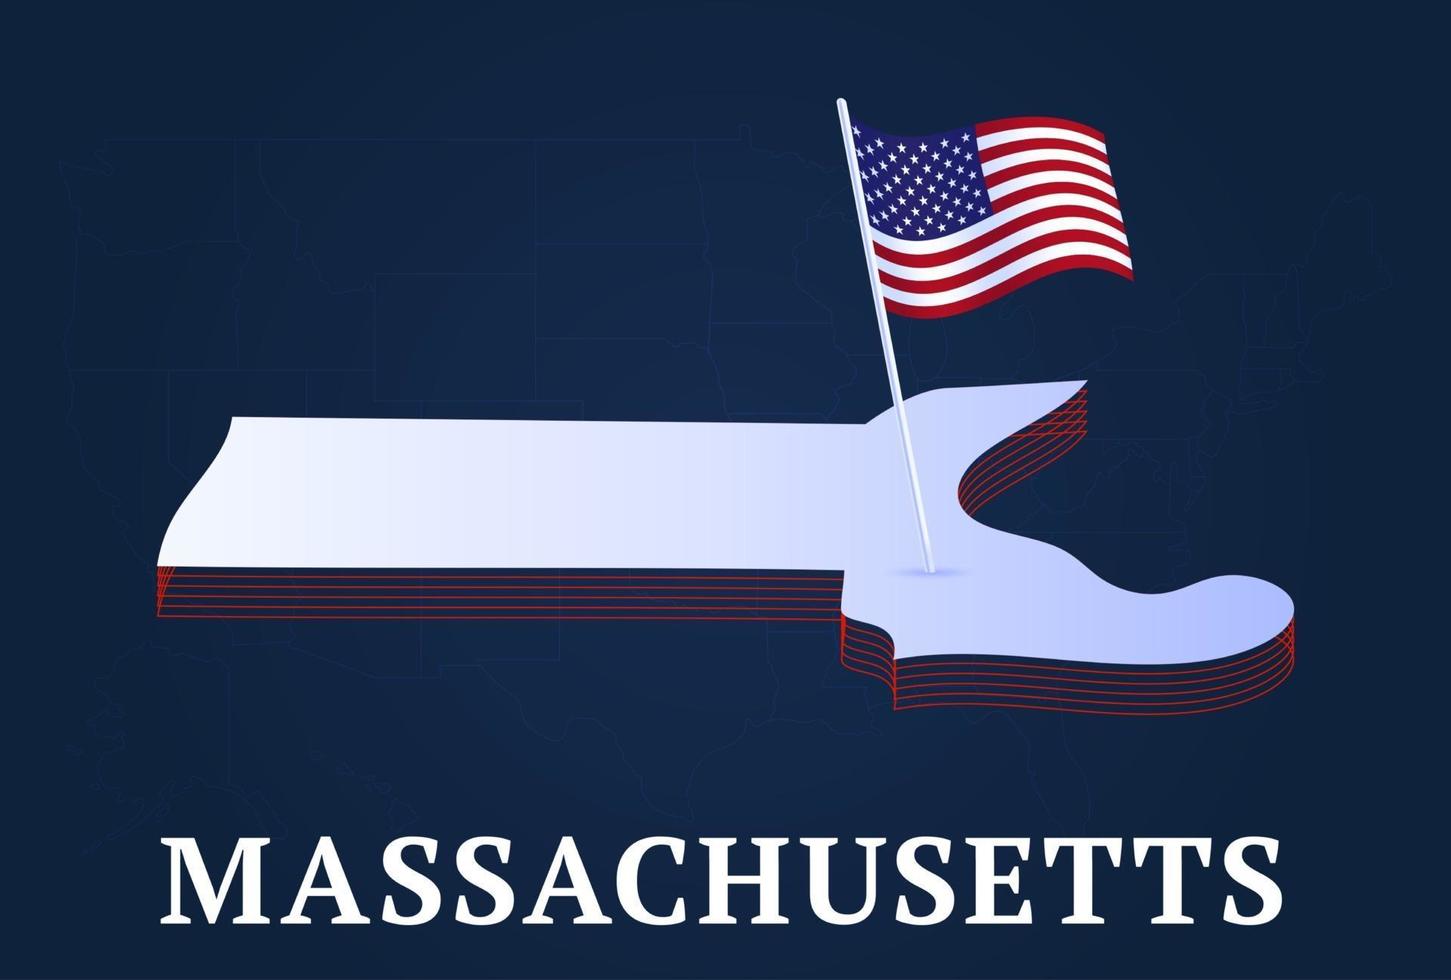 massachusetts state Isometric map and USA national flag 3D isometric shape of us state Vector Illustration